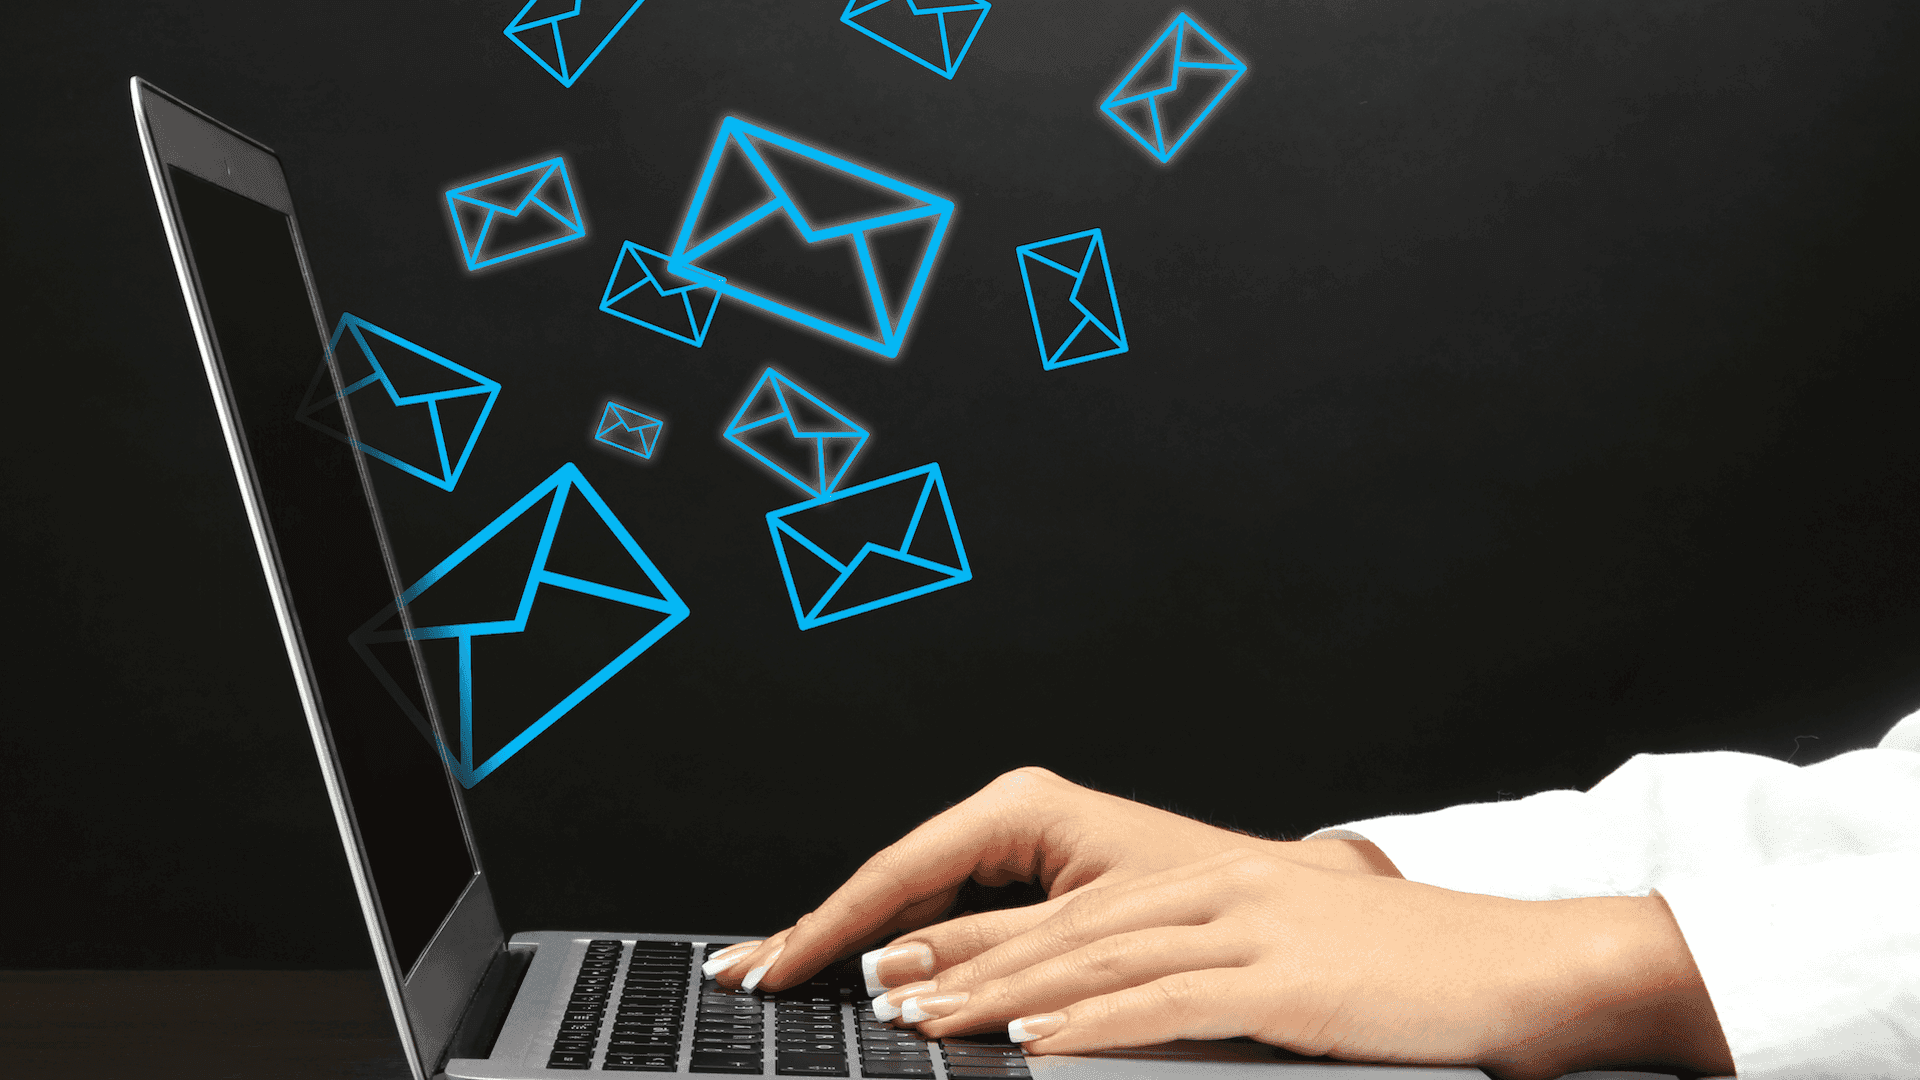 Stay connected with the world through email